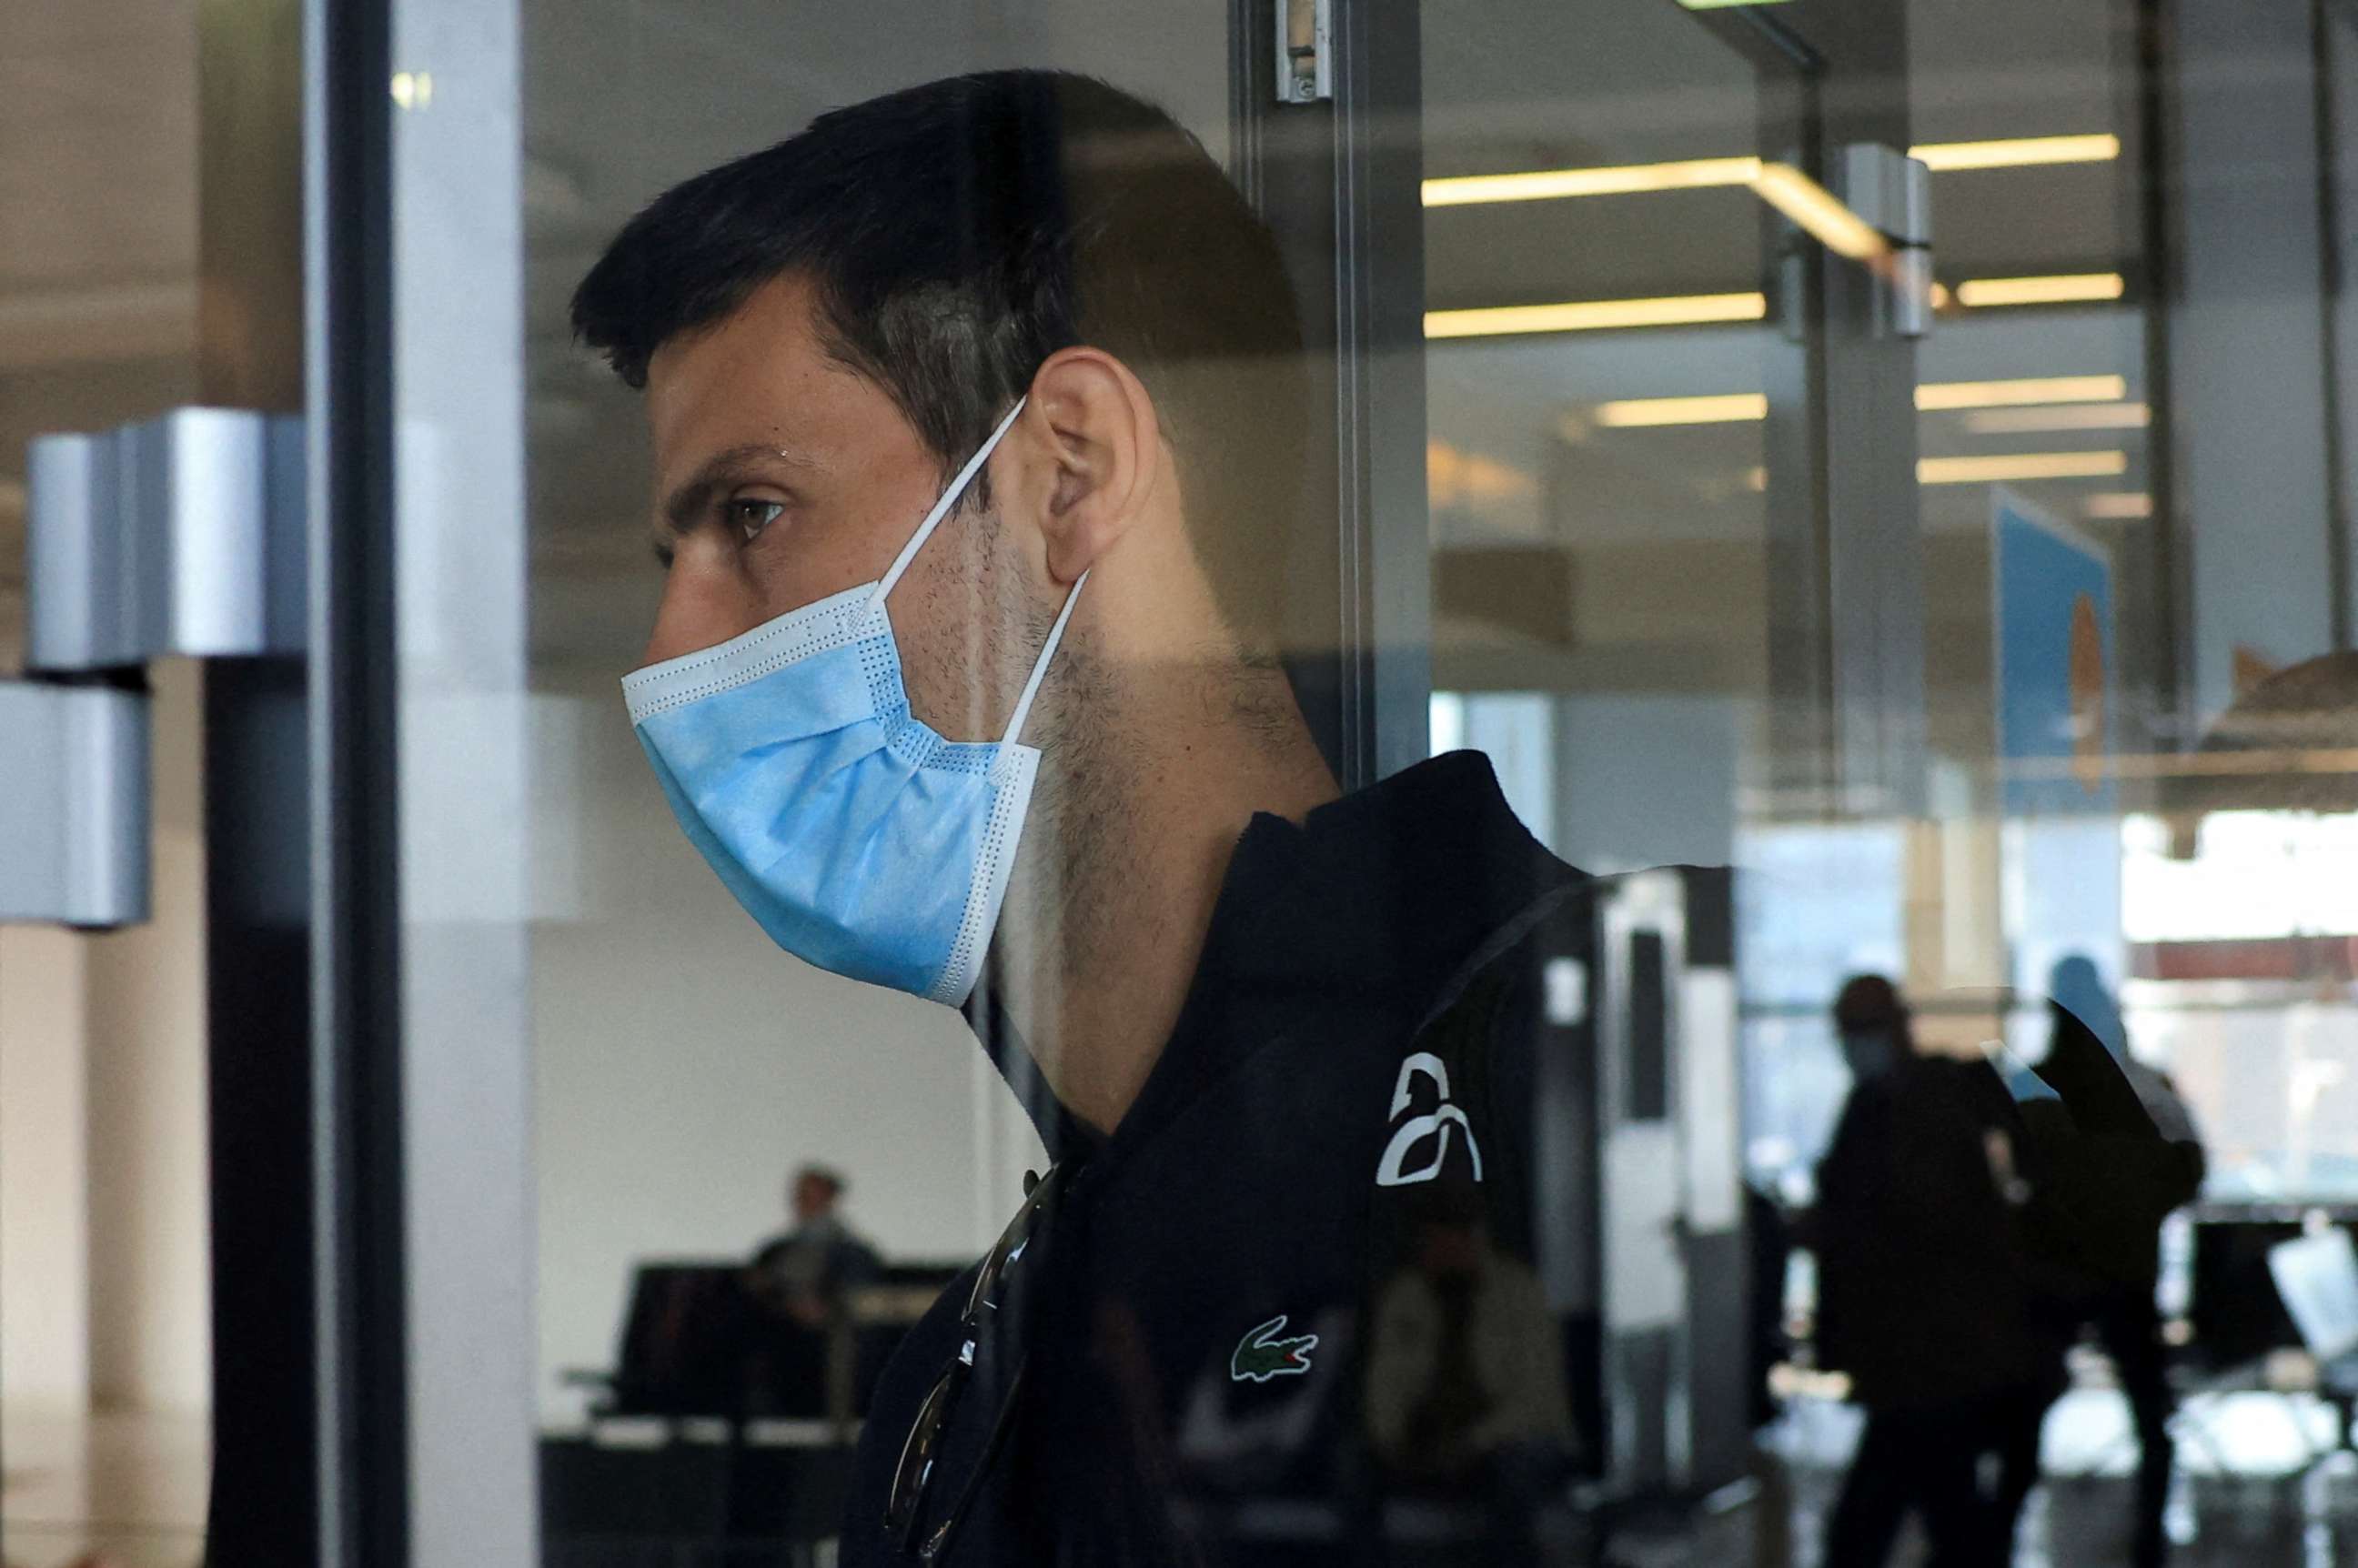 PHOTO: Novak Djokovic arrives at Nikola Tesla Airport in Belgrade, Serbia, Jan. 17, 2022, after the Australian Federal Court upheld a government decision to cancel his visa to play in the Australian Open.